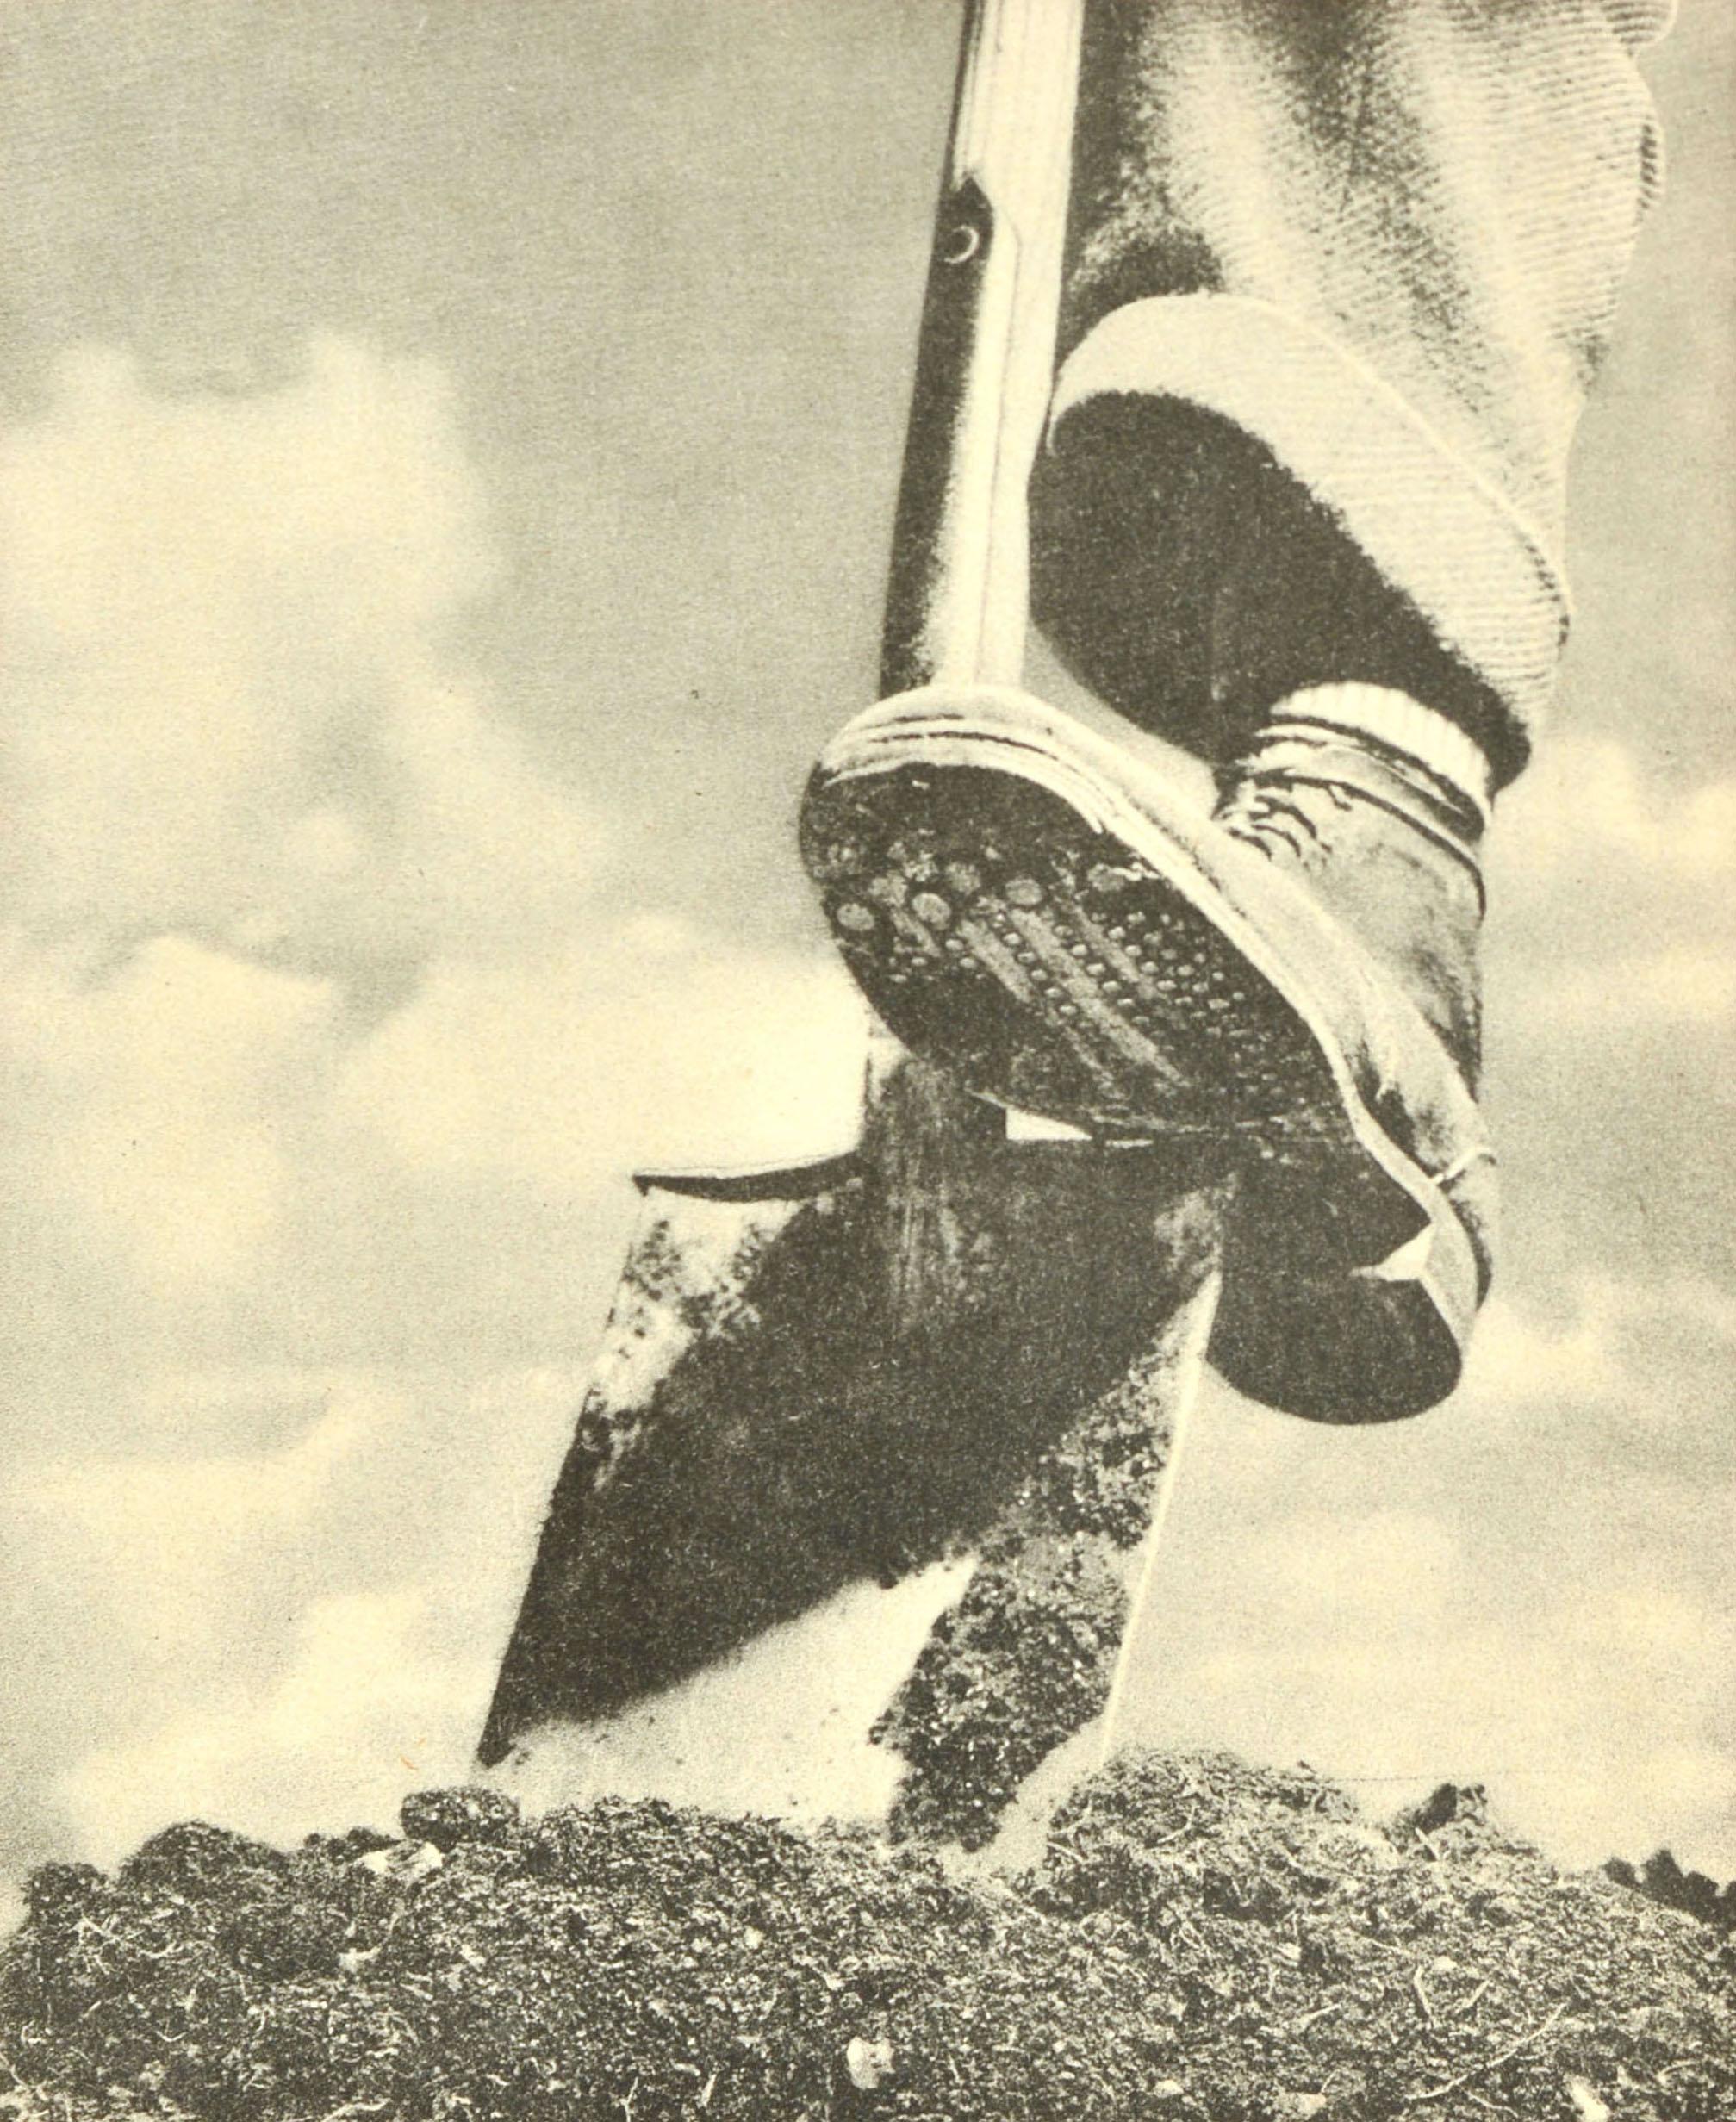 Original vintage World War Two propaganda poster - Dig for Victory - featuring the iconic black and white photograph of a worker pushing down a shovel with his boot, digging into the earth against a sky background, the title above on the bold